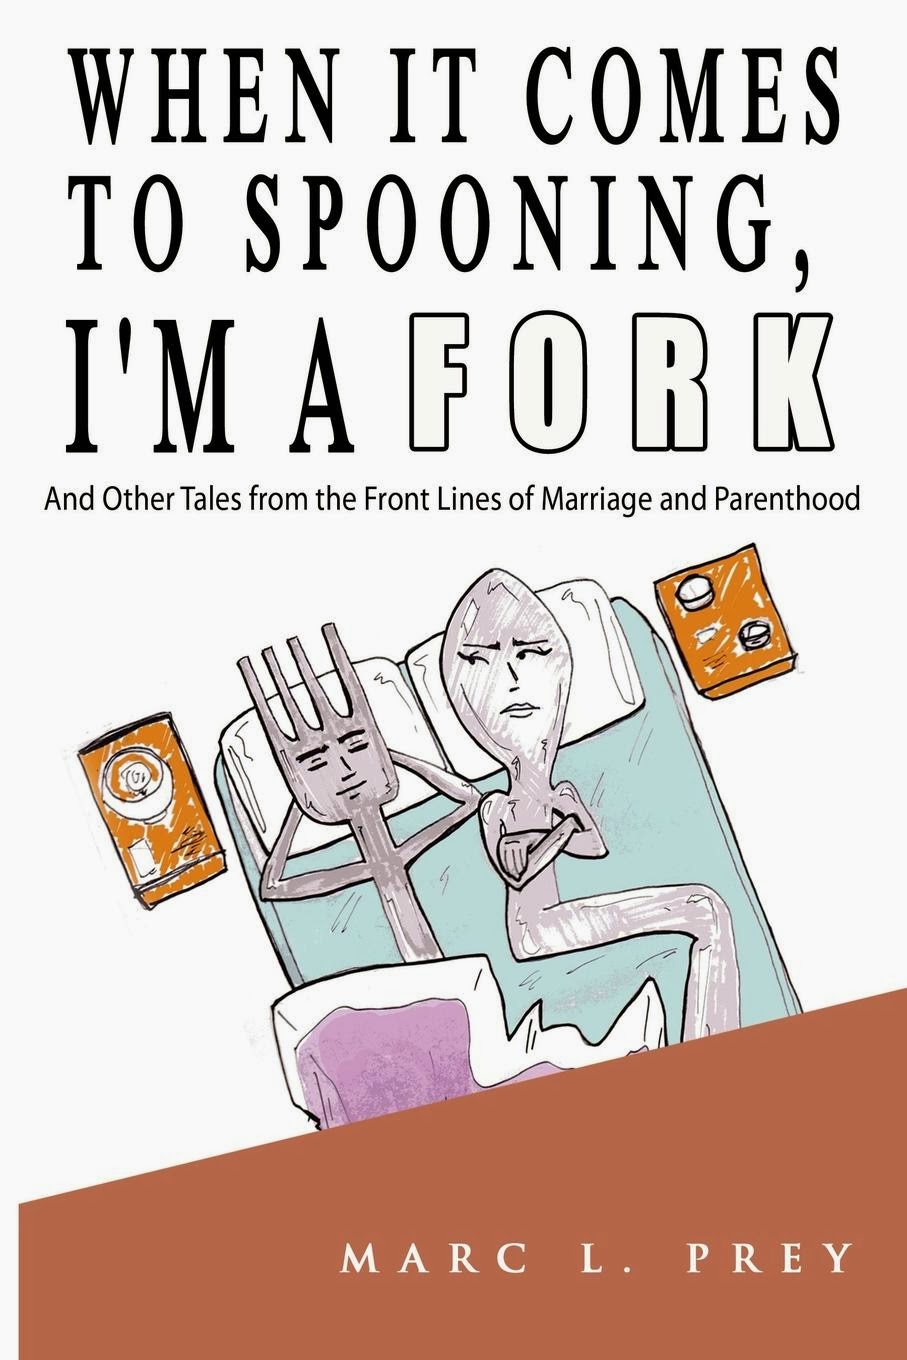 When it come s to you. Fork me, Spoon me книга. When it comes. When it comes to. Fork me, Spoon me ами Рейли книга.